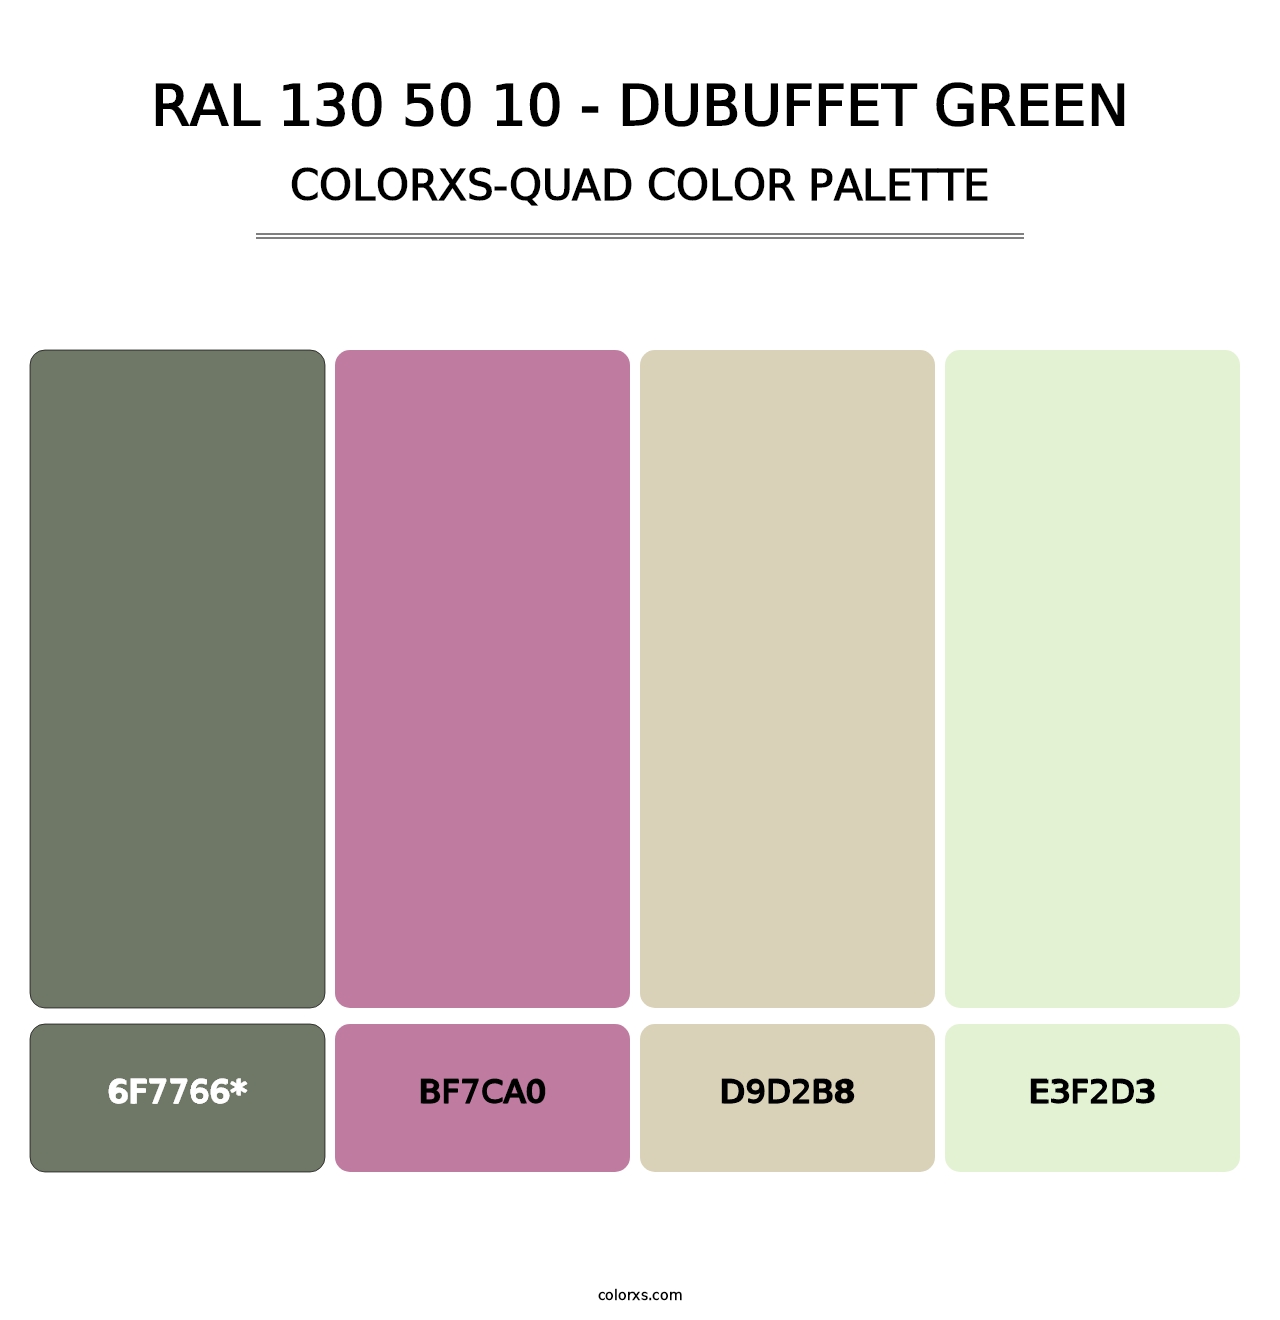 RAL 130 50 10 - Dubuffet Green - Colorxs Quad Palette